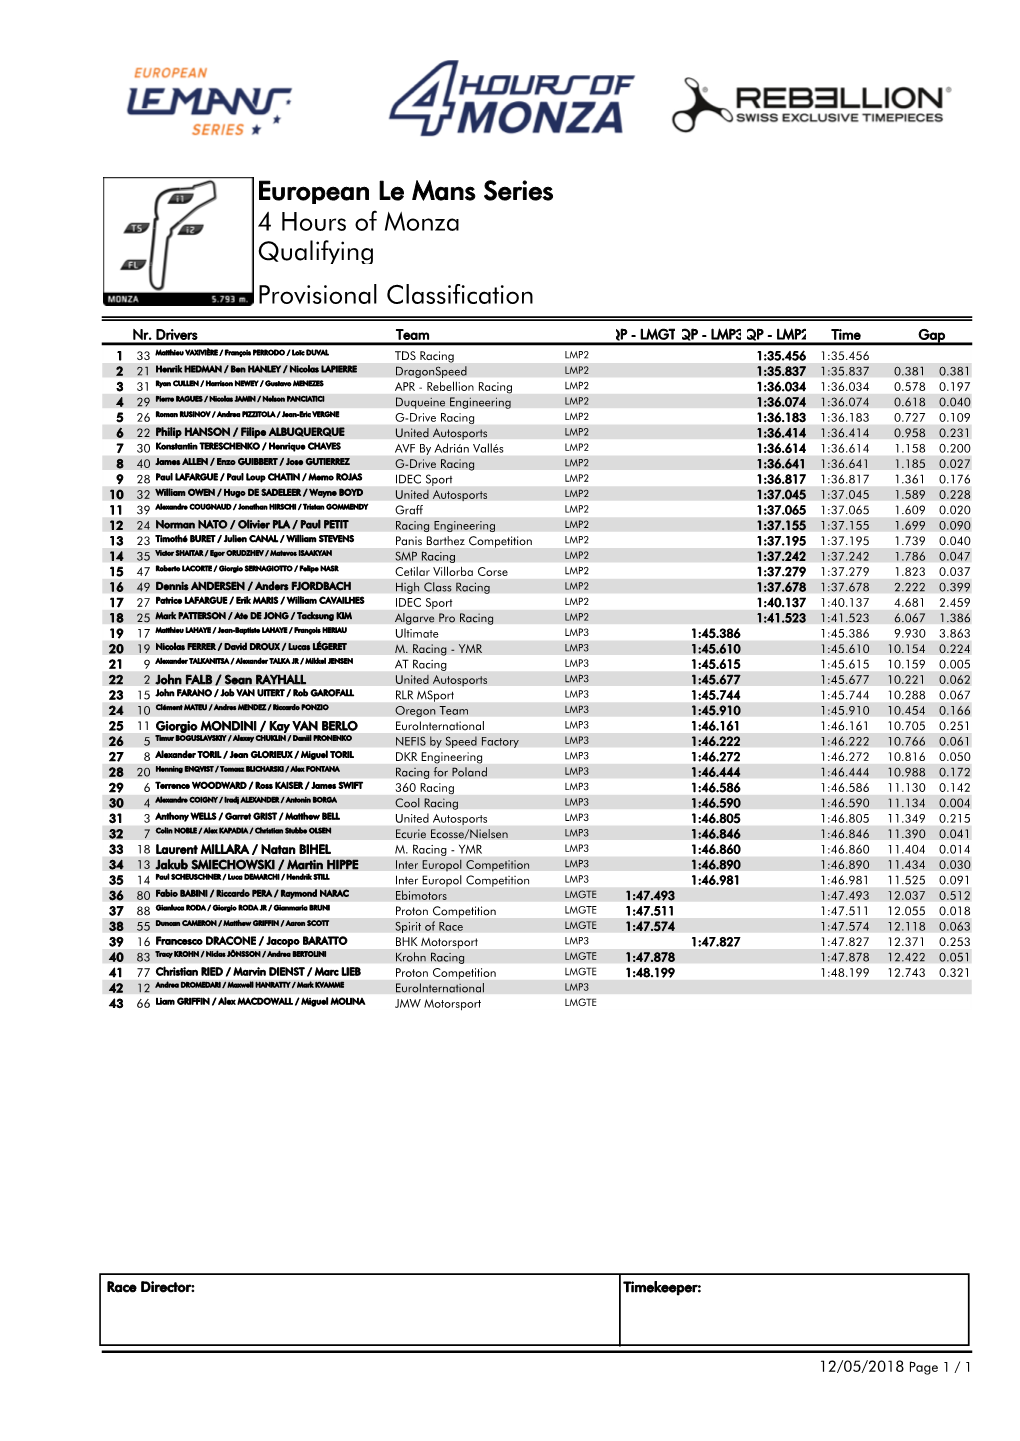 European Le Mans Series 4 Hours of Monza Qualifying Provisional Classification